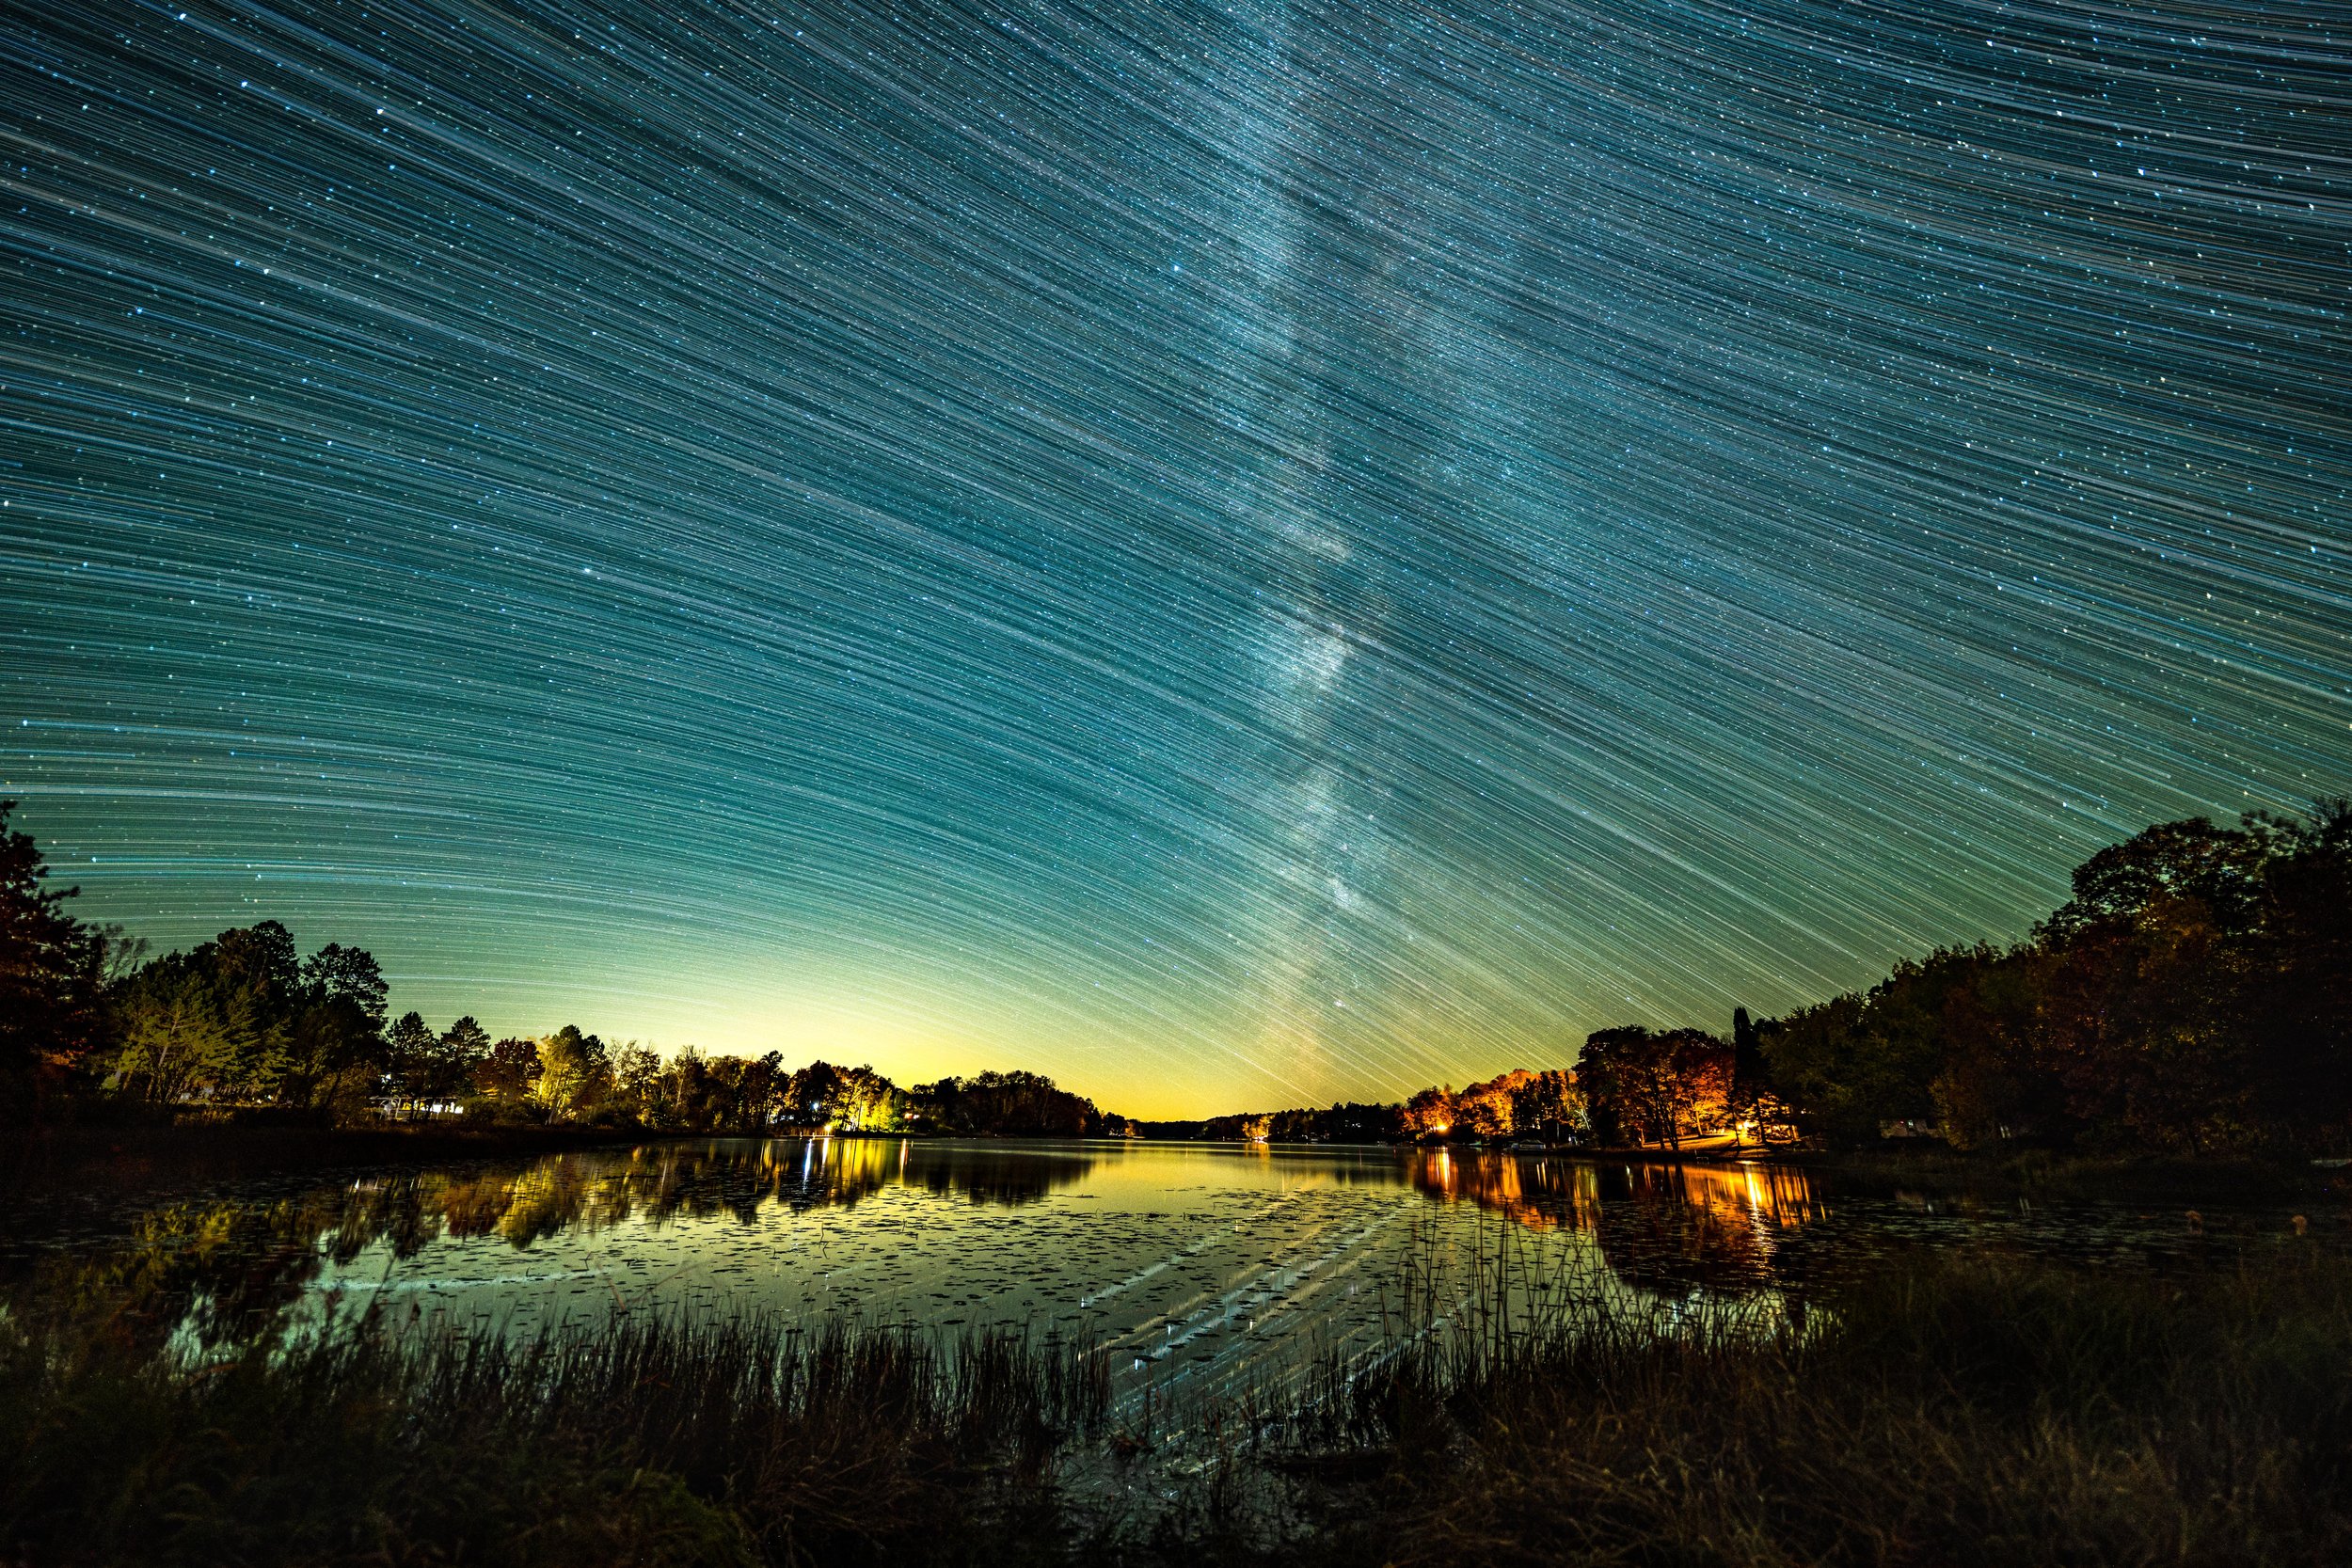  The Milky Way and star trails above a secluded lake in Minnesota.  